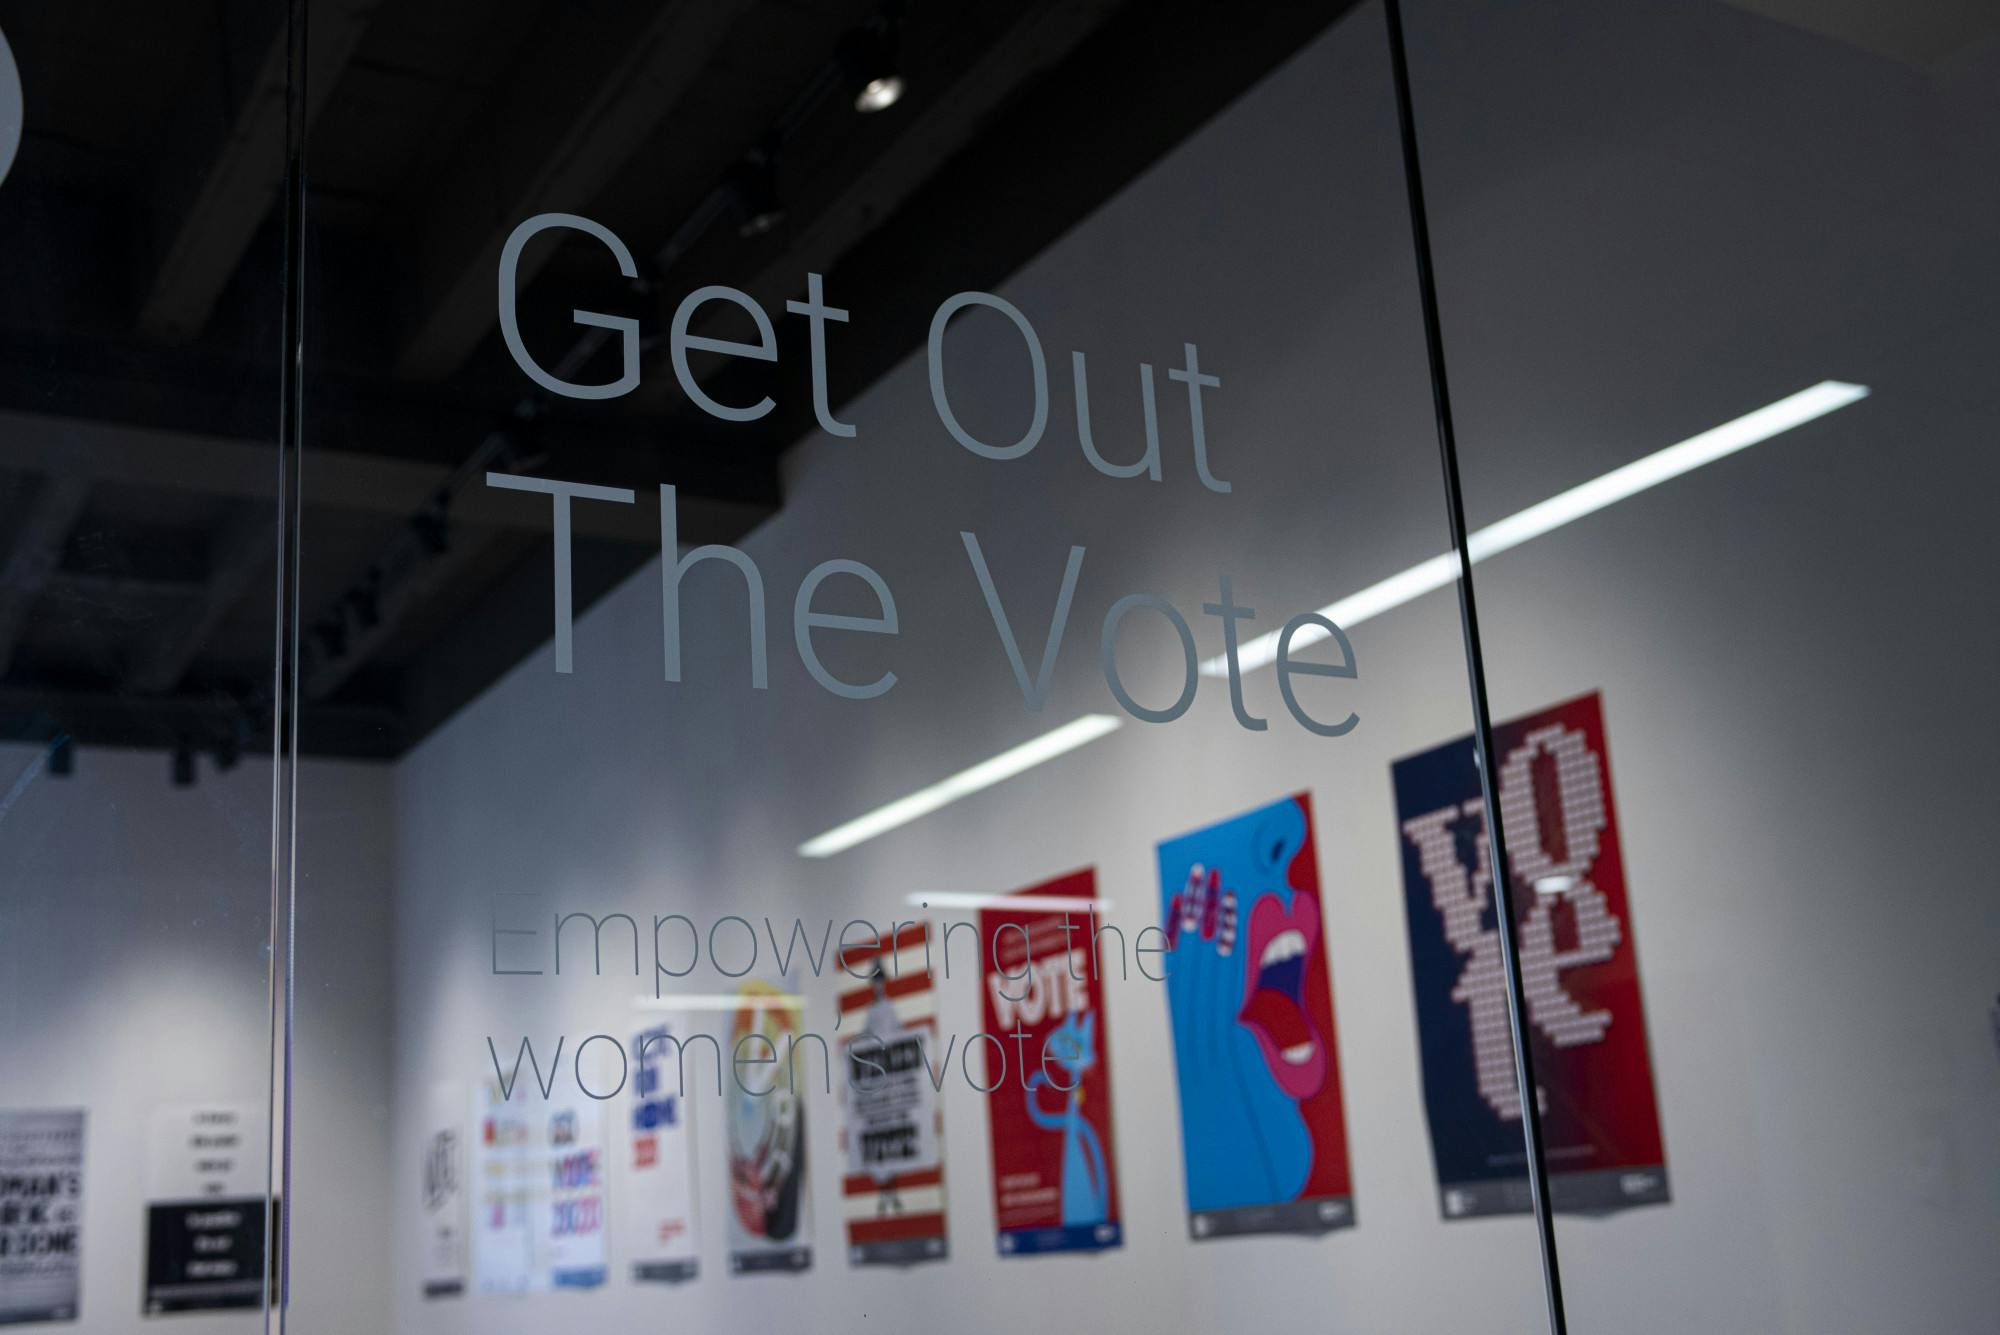 The MSU Union Art Gallery presents the "2020 Get Out the Vote: Empowering the Women's Vote" poster gallery located on the second floor. The gallery celebrates 100 years since women gained the right to vote. Shot on Oct. 21, 2020.